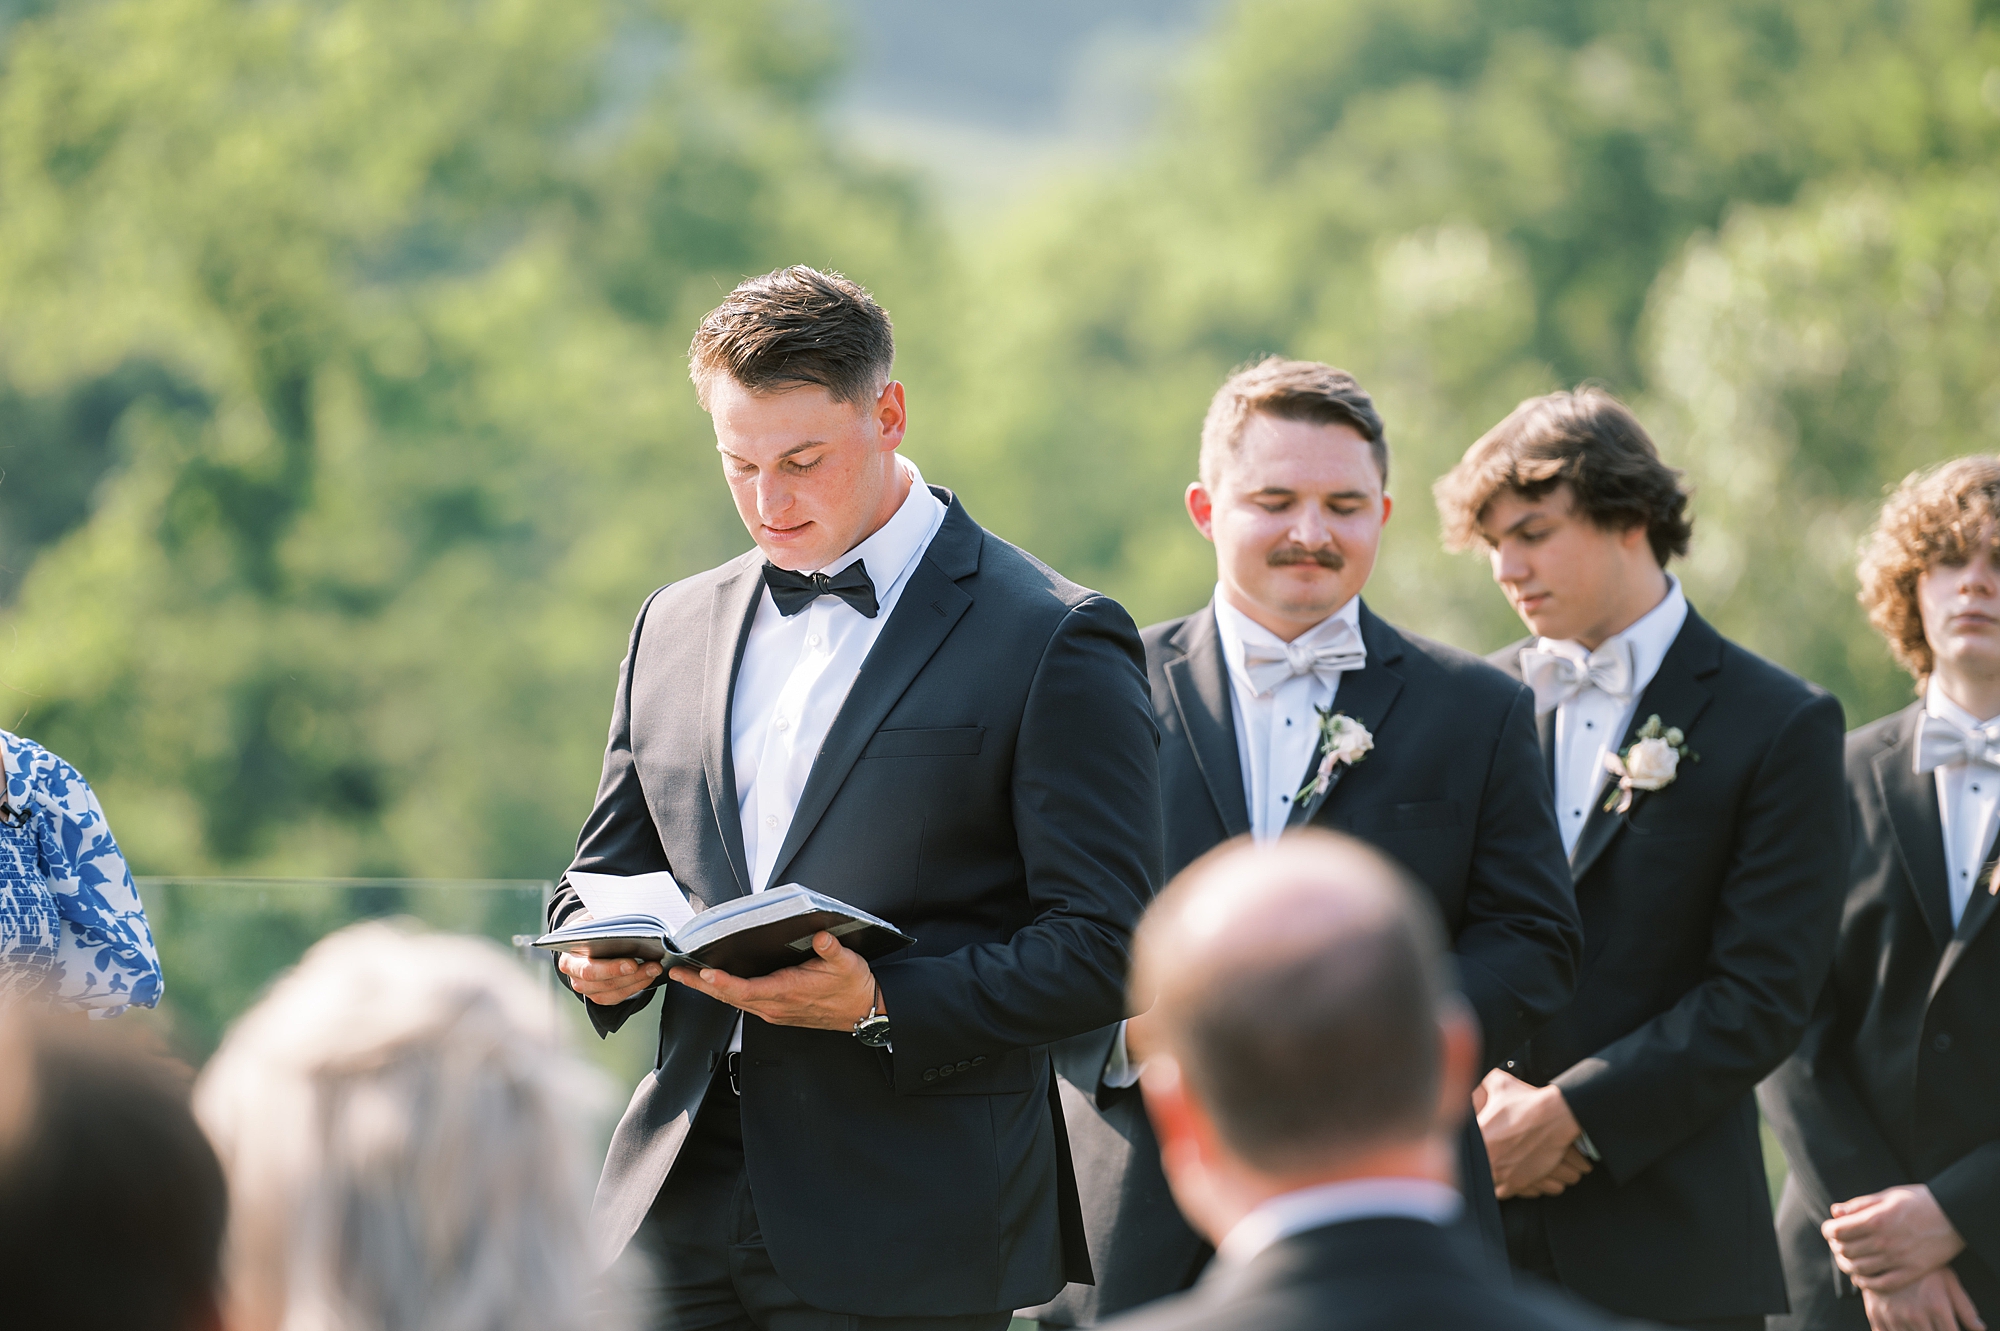 groom reading vows during ceremony